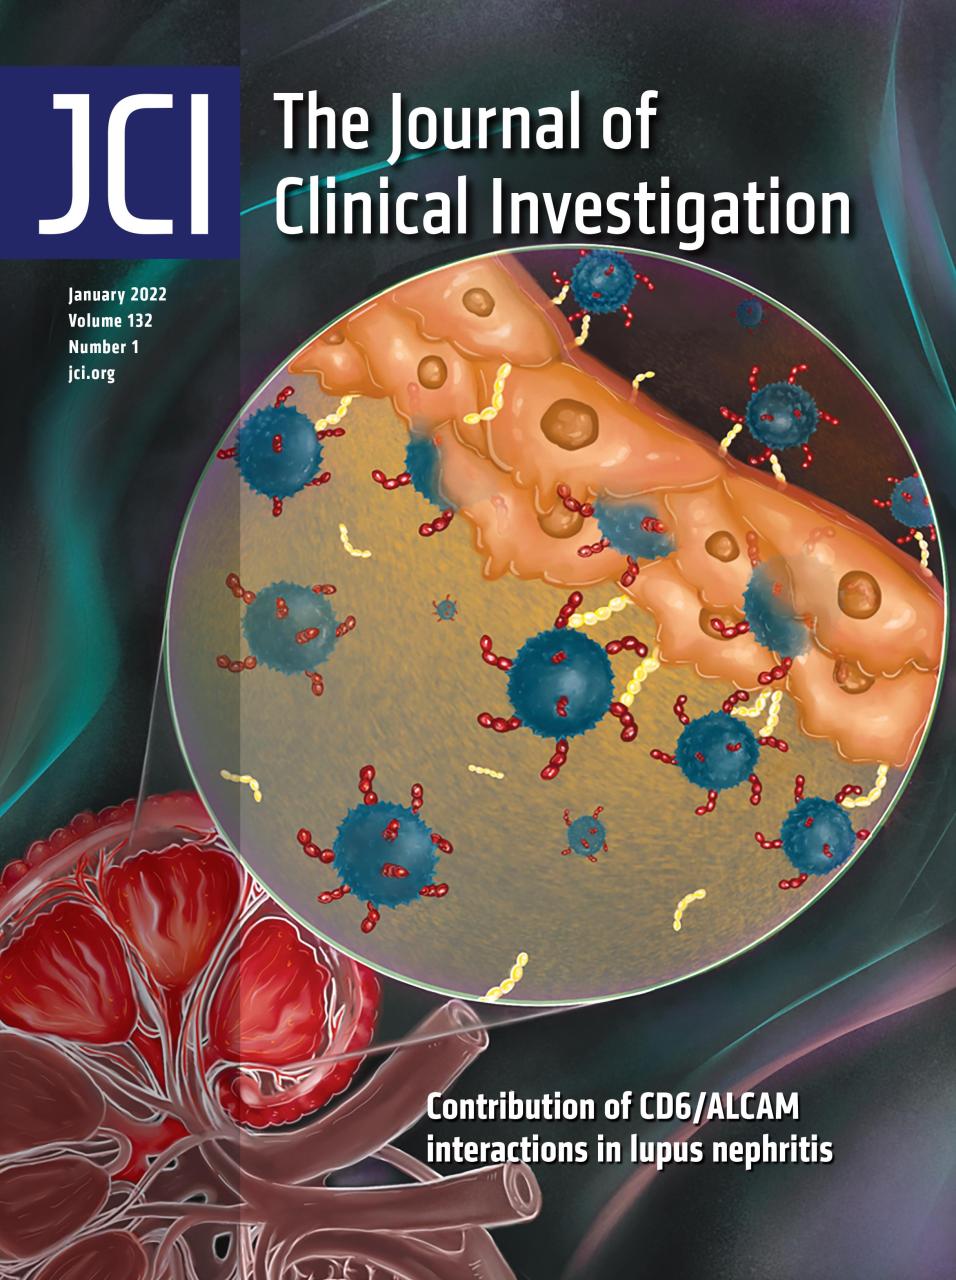 Research of Prof. Chaim Putterman, Associate Dean for Research, on the cover of JCI